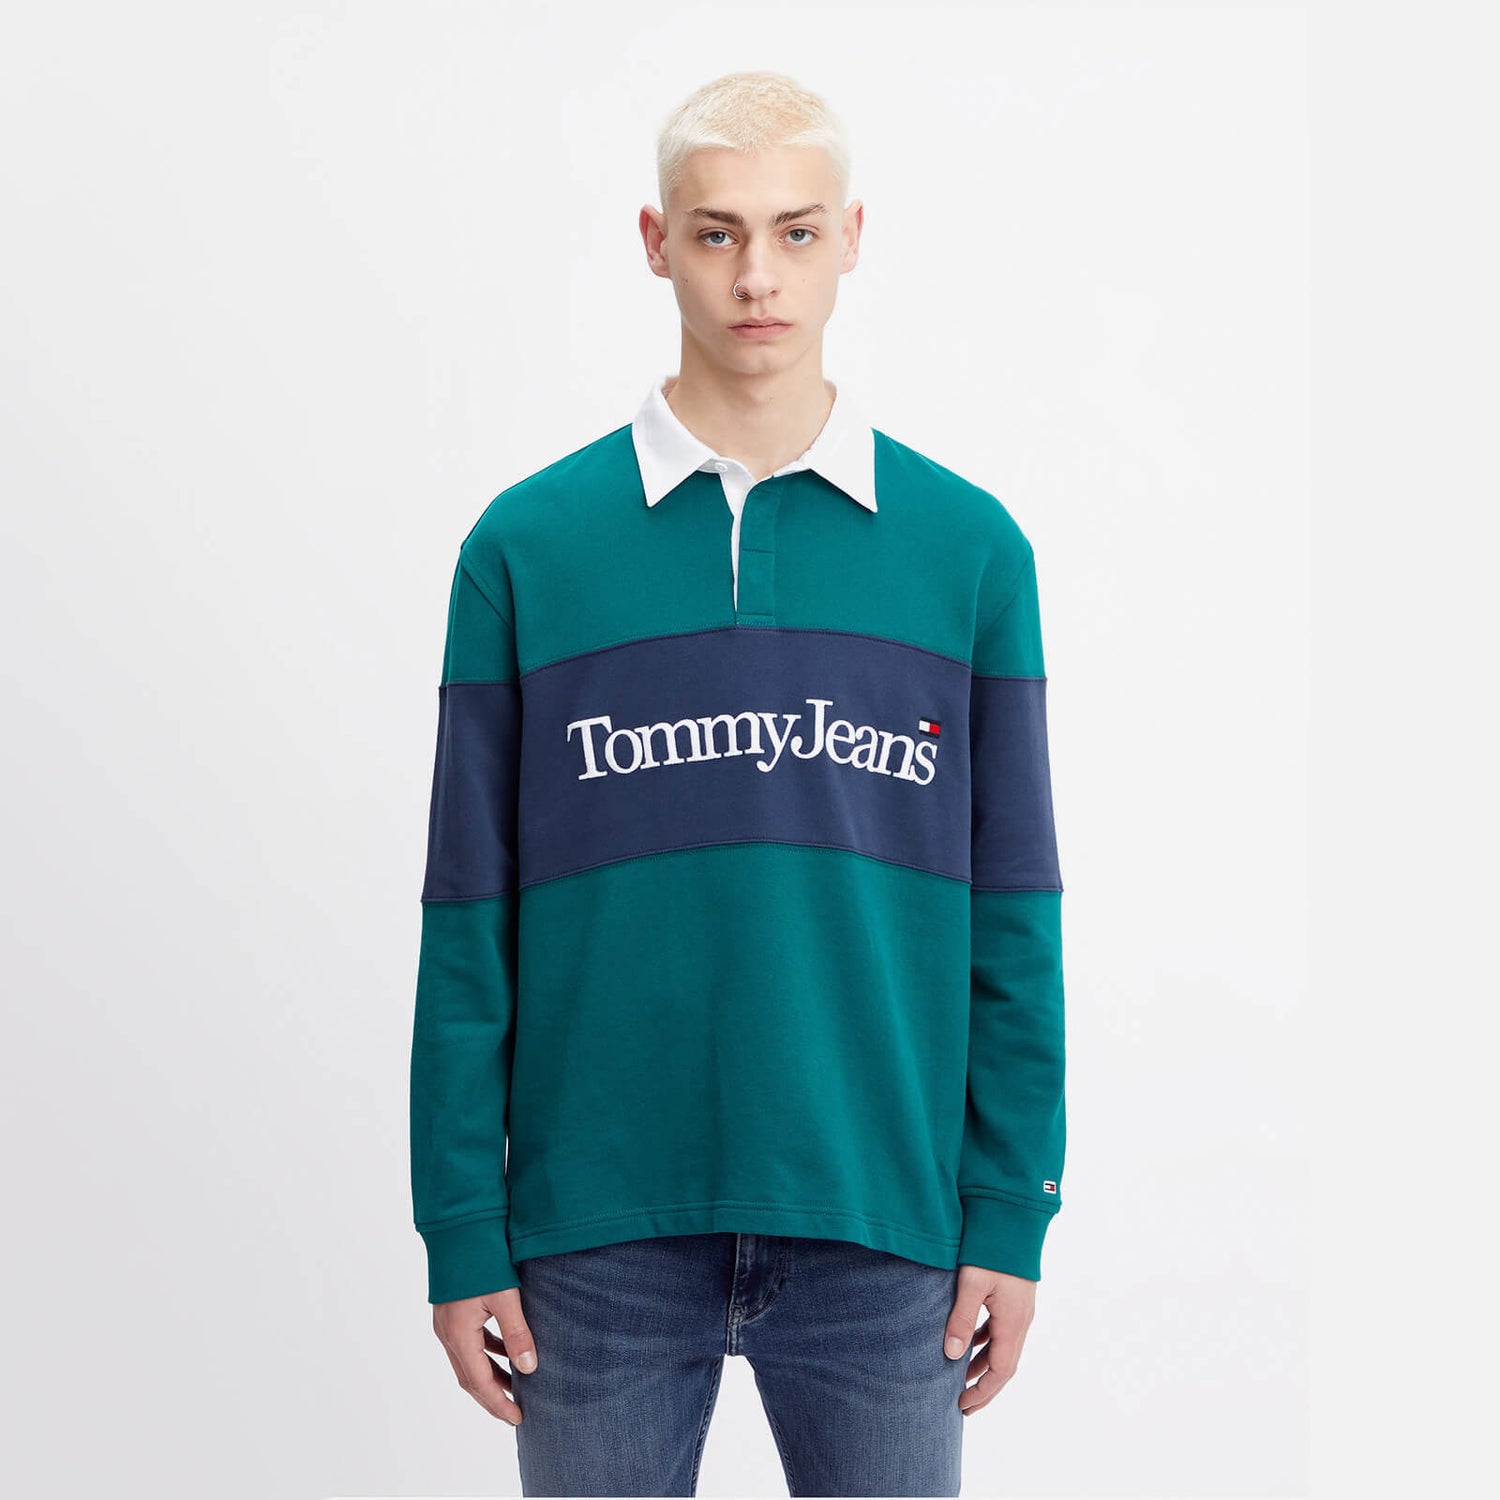 Tommy Jeans Serif Linear Colourblock Cotton Rugby Top | TheHut.com